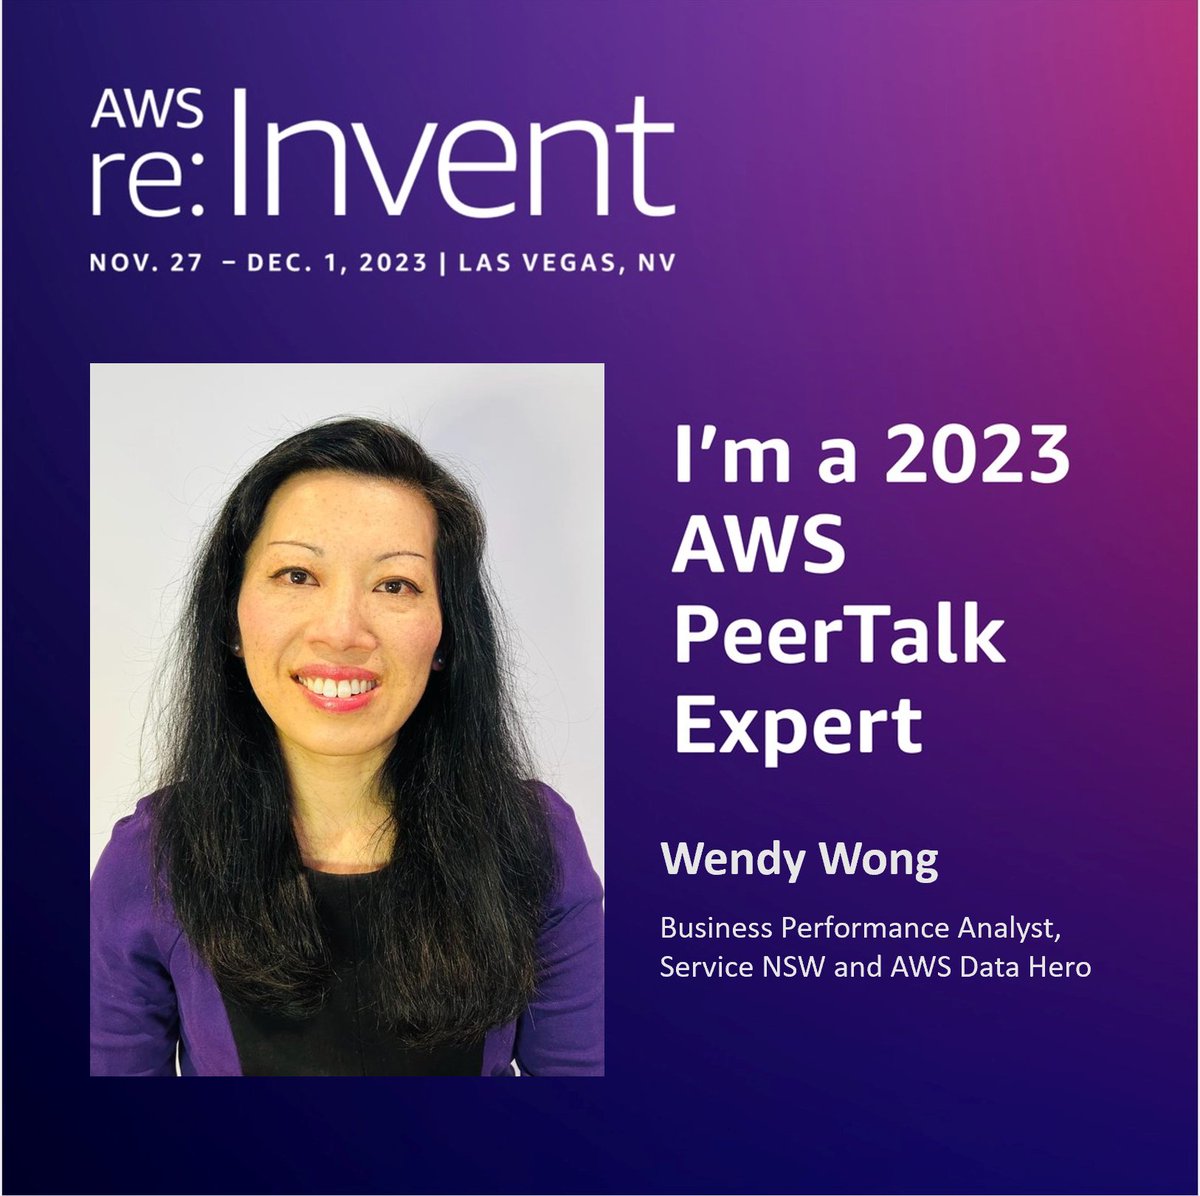 PeerTalk is the official networking tool of AWS #reInvent, and I'm being featured! PeerTalk is designed to help you facilitate meaningful connections at re:Invent- check back in early November for the launch announcement and how to book a meeting with me.
#AWSCommunity #PeerTalk